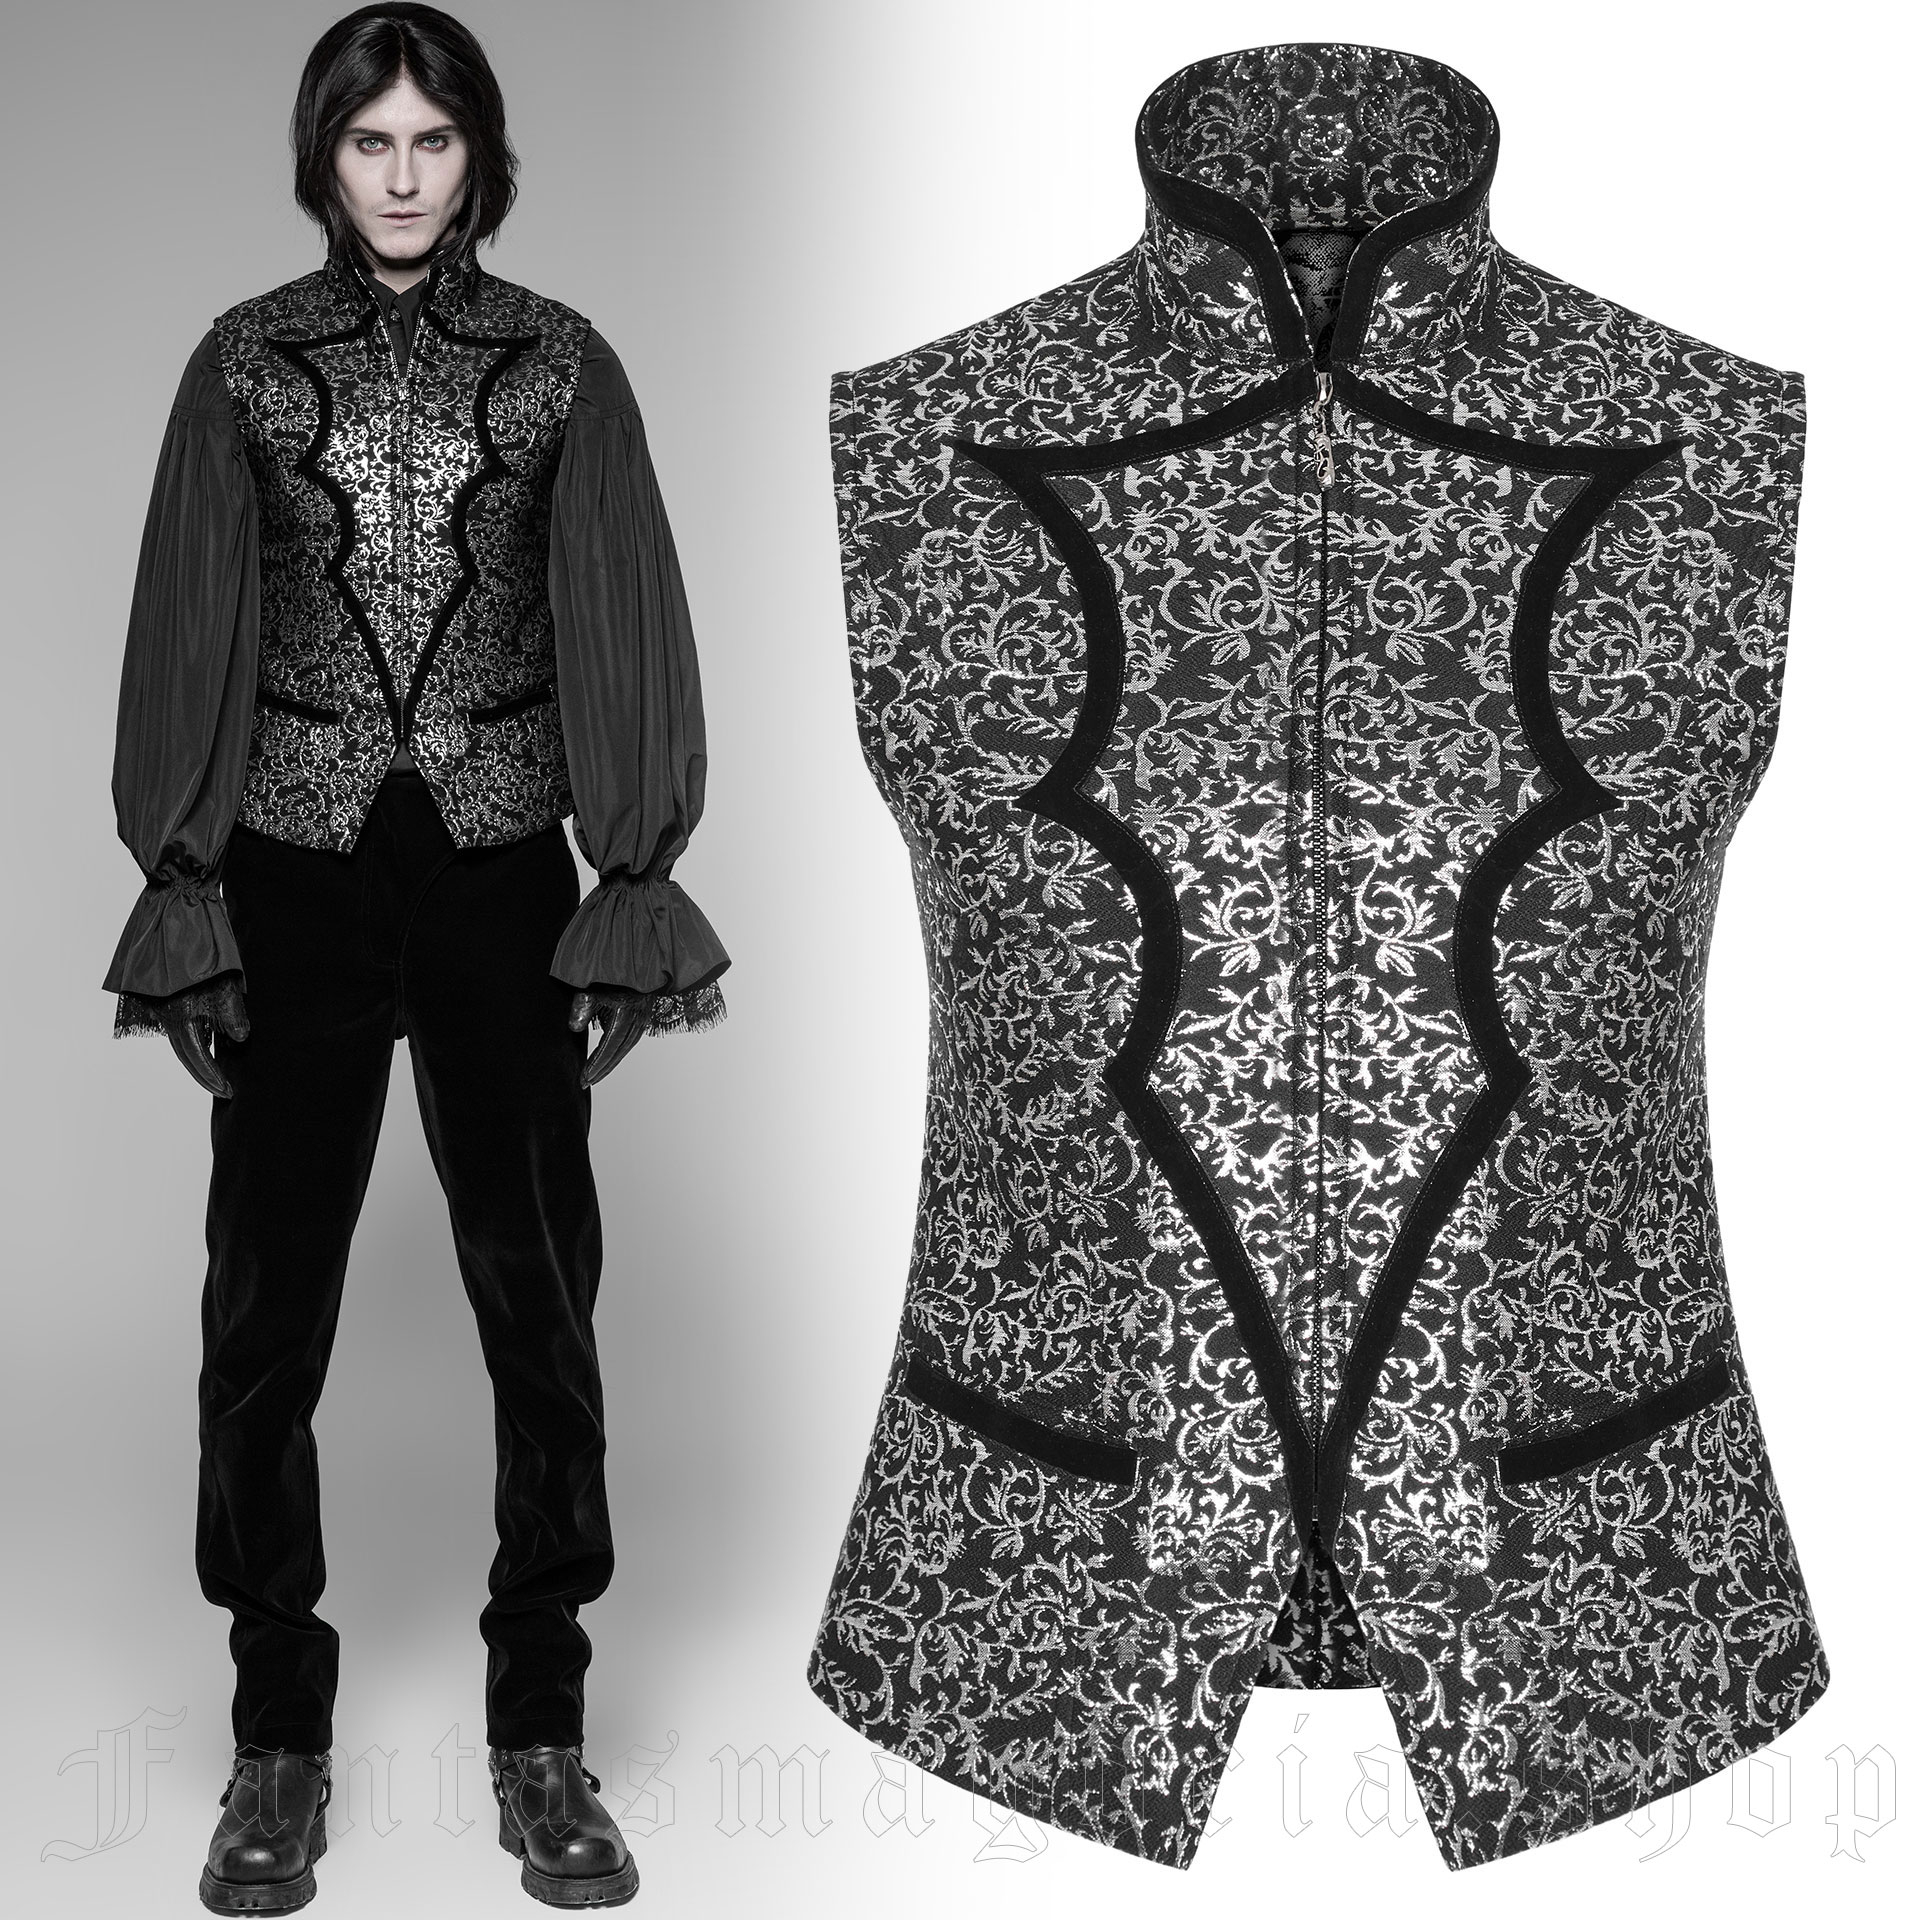 Black and silver brocade vest with Mandarin collar by Punk